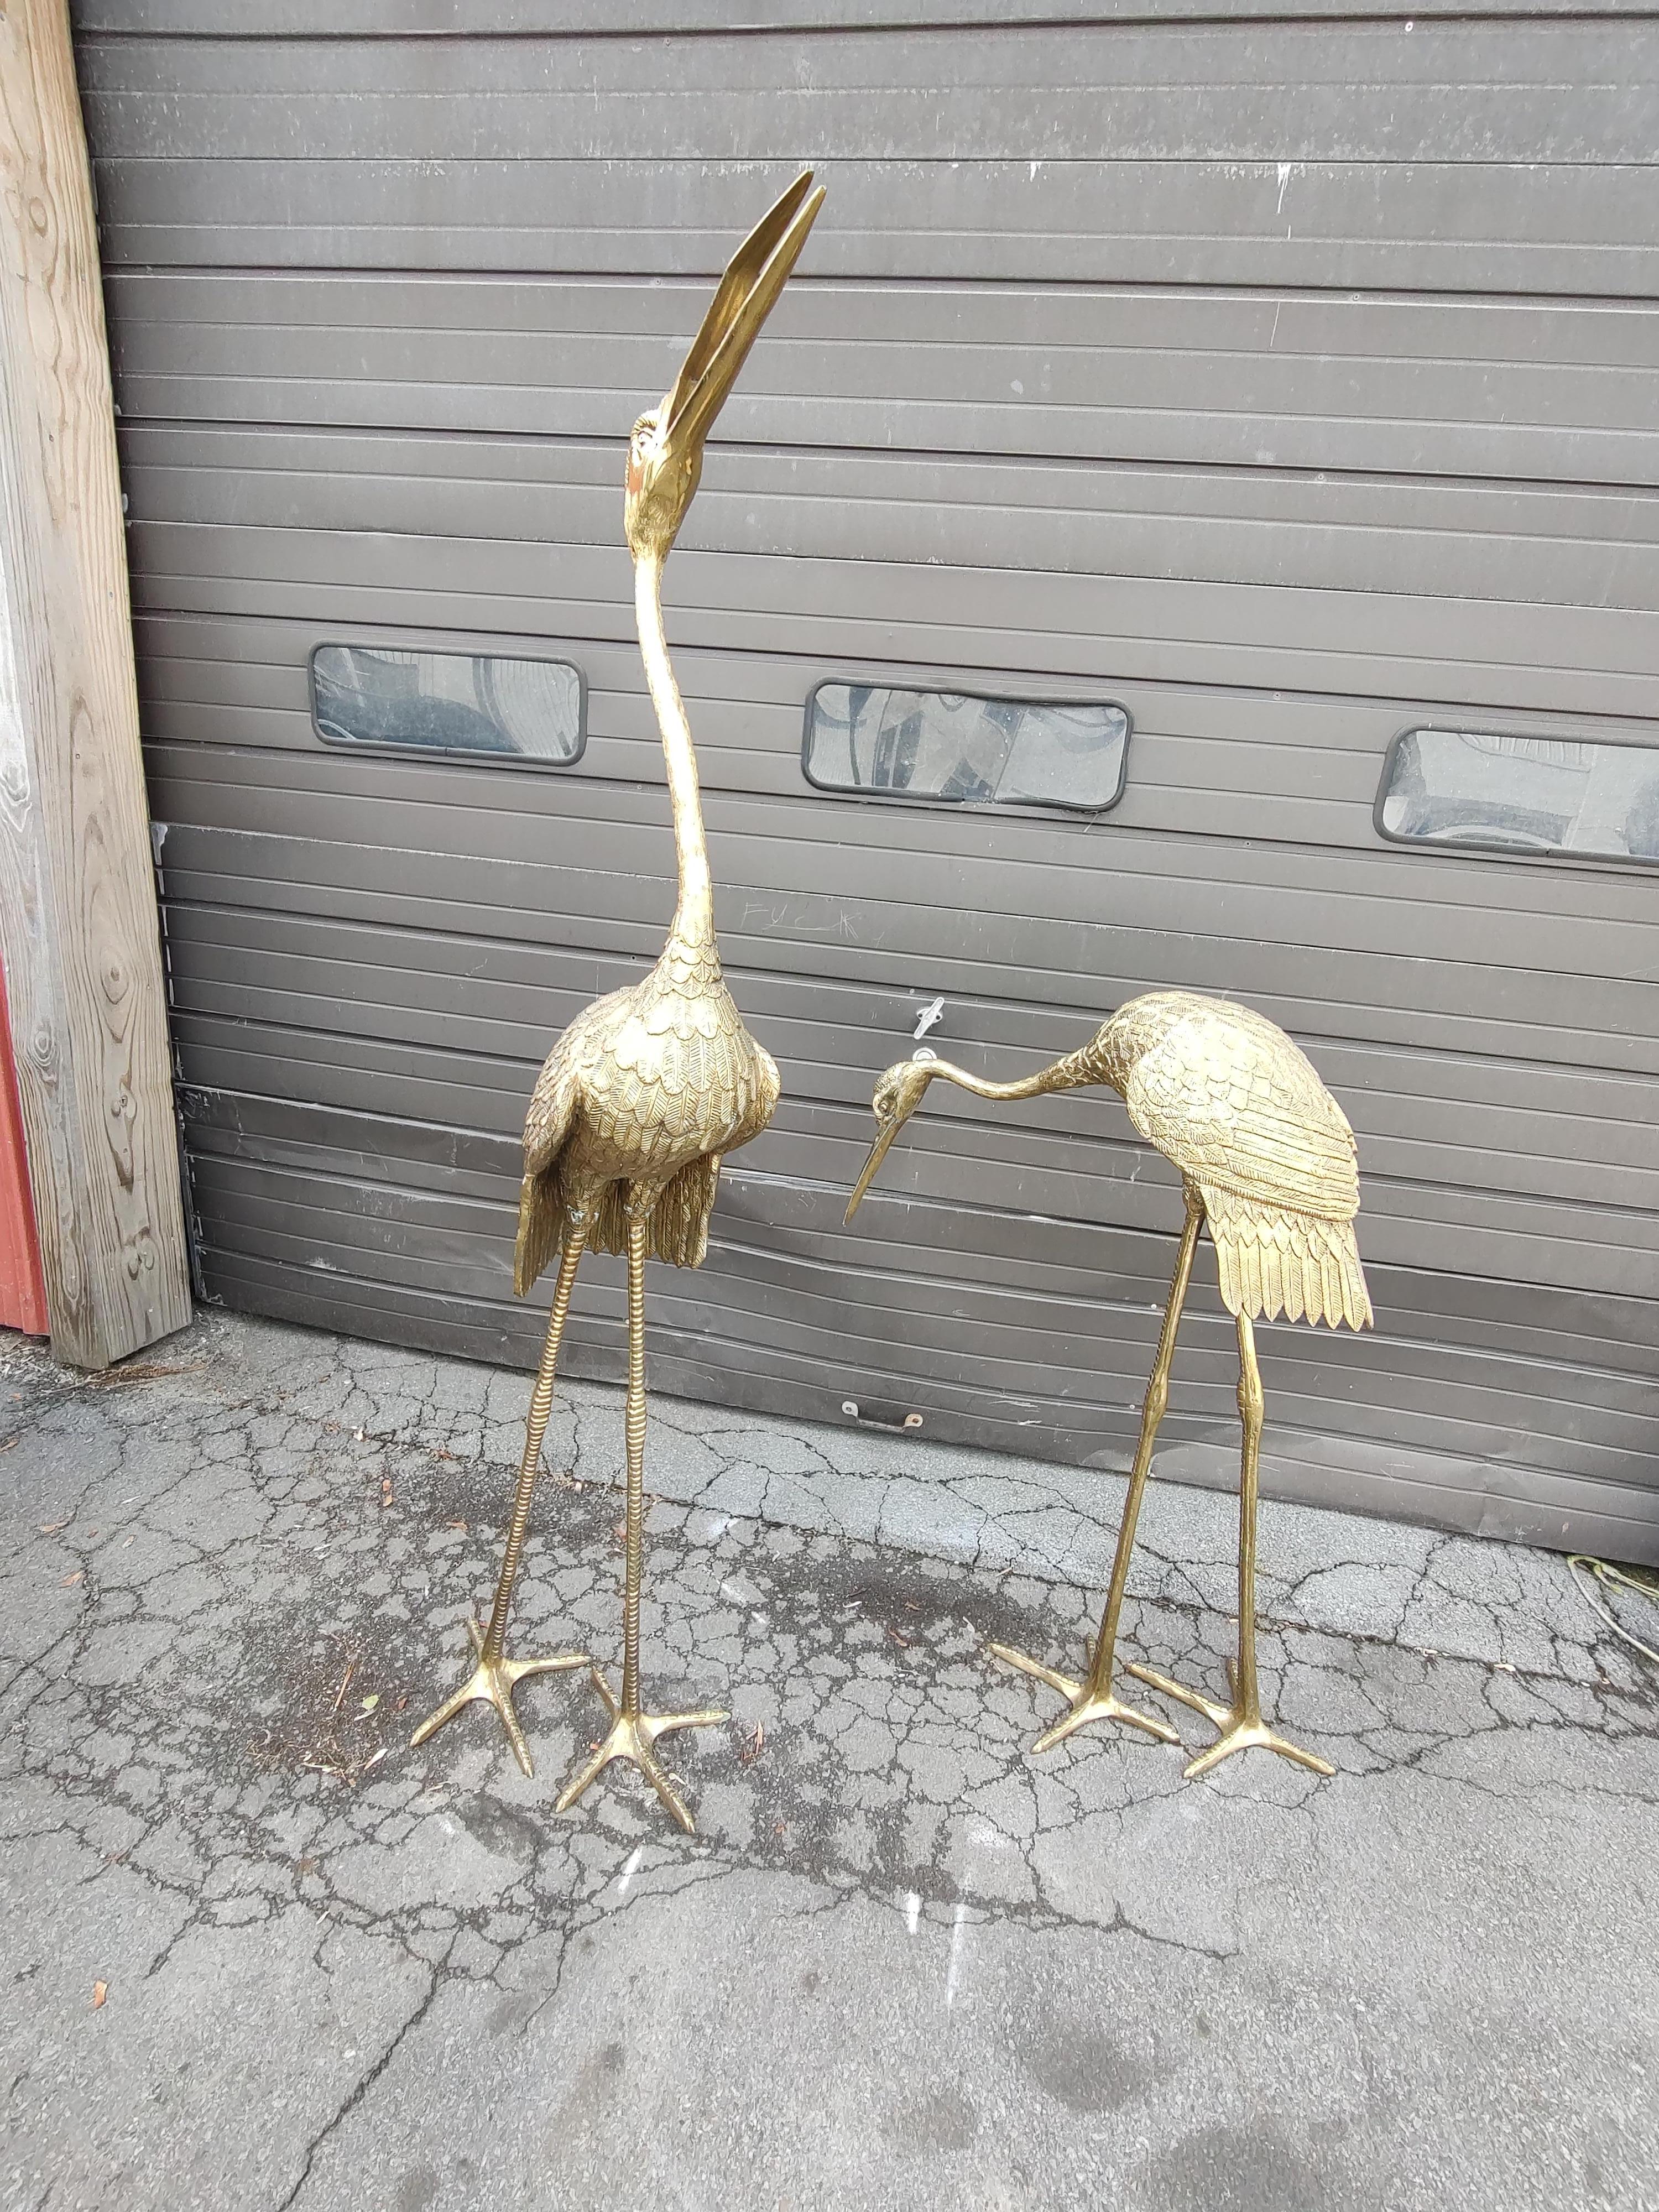 Pair of Large Brass Garden Cranes / Herons Statuary Indoor - Outdoor C1970 In Good Condition For Sale In Port Jervis, NY